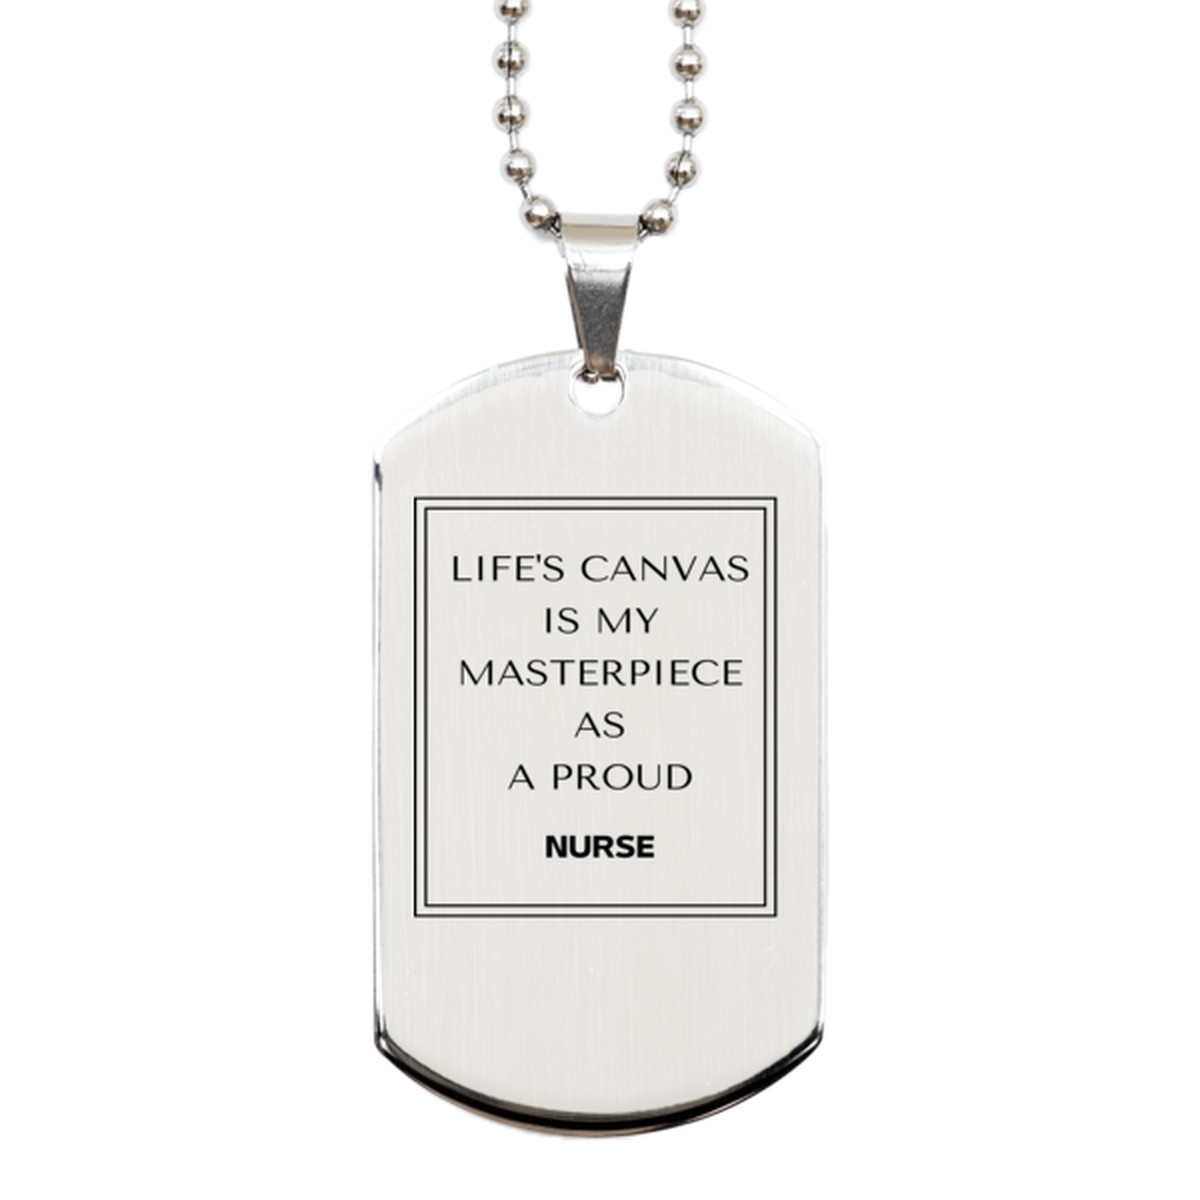 Proud Nurse Gifts, Life's canvas is my masterpiece, Epic Birthday Christmas Unique Silver Dog Tag For Nurse, Coworkers, Men, Women, Friends